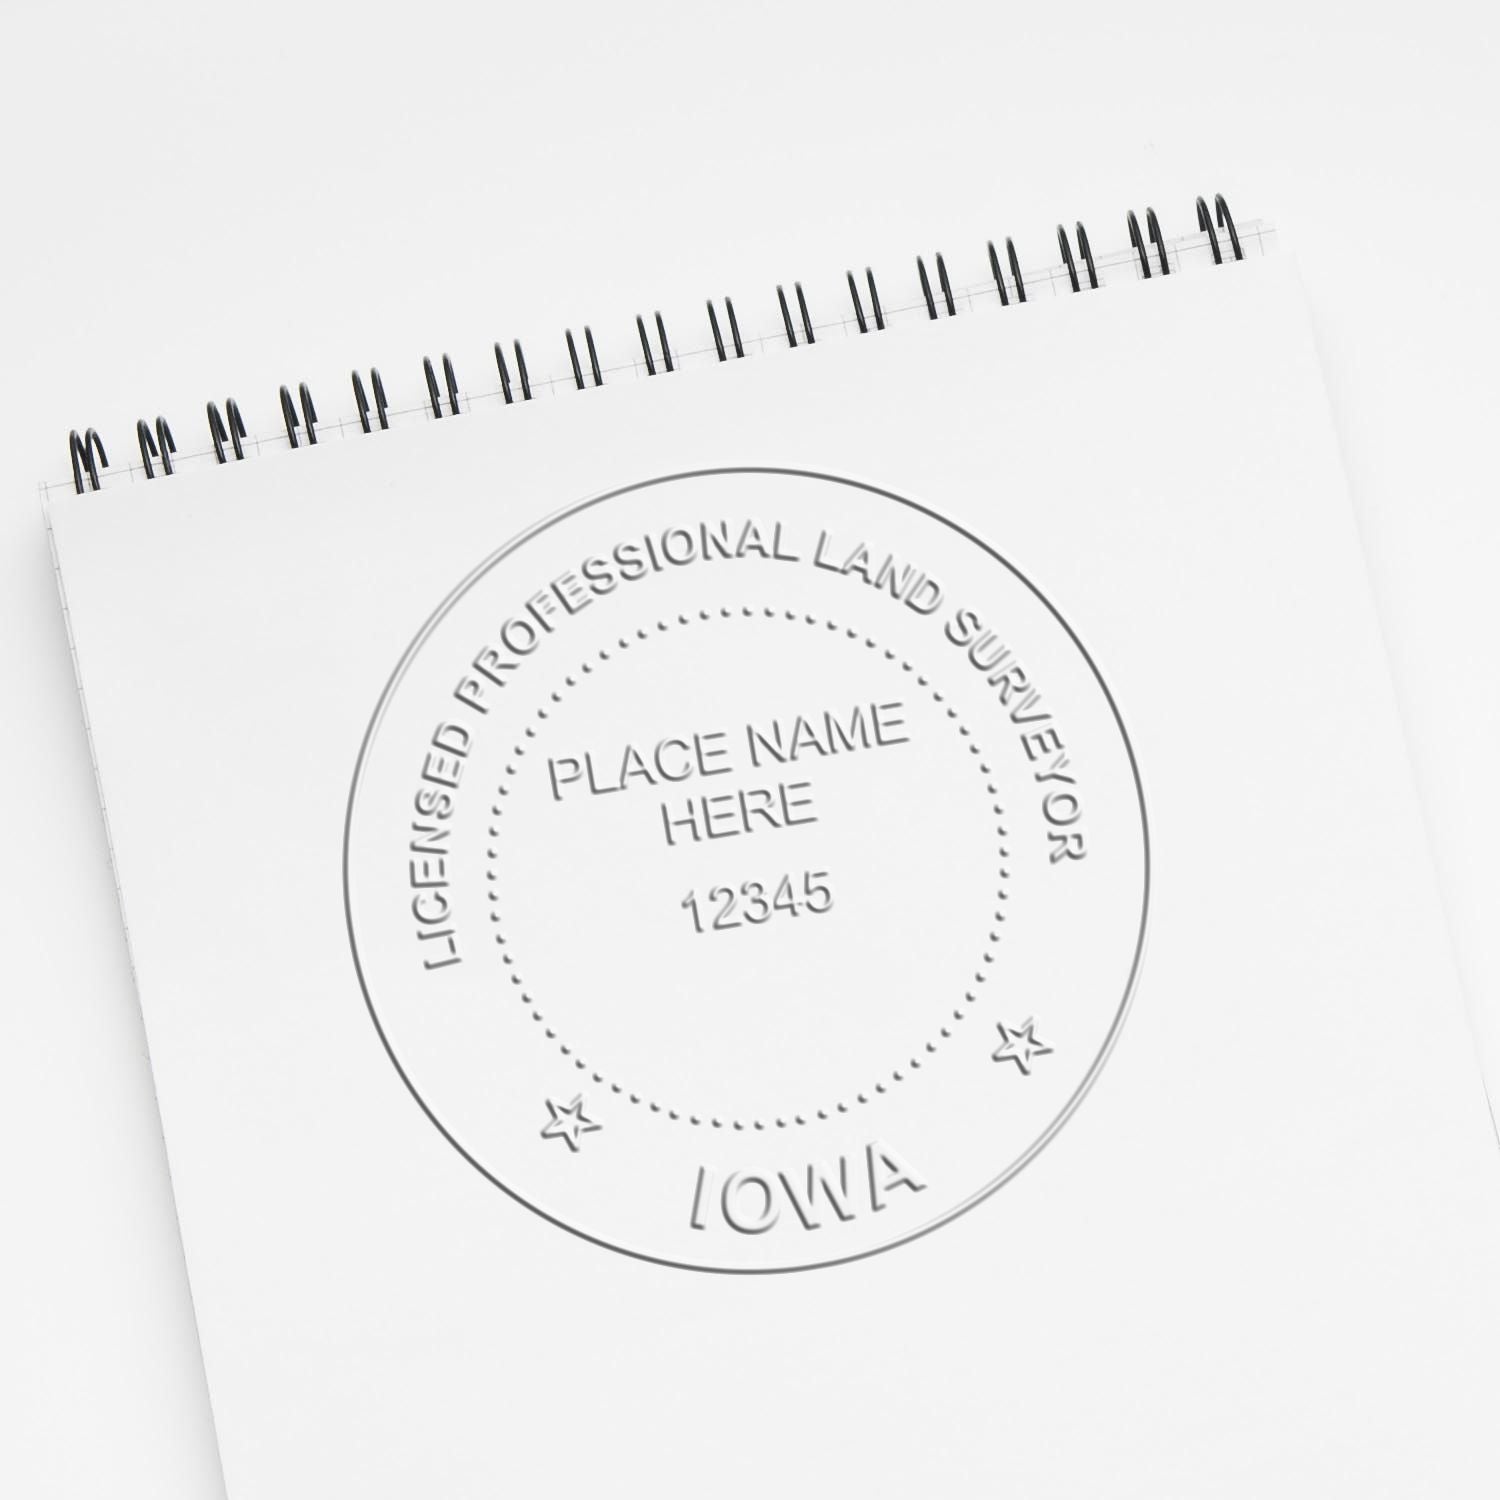 Another Example of a stamped impression of the Long Reach Iowa Land Surveyor Seal on a piece of office paper.